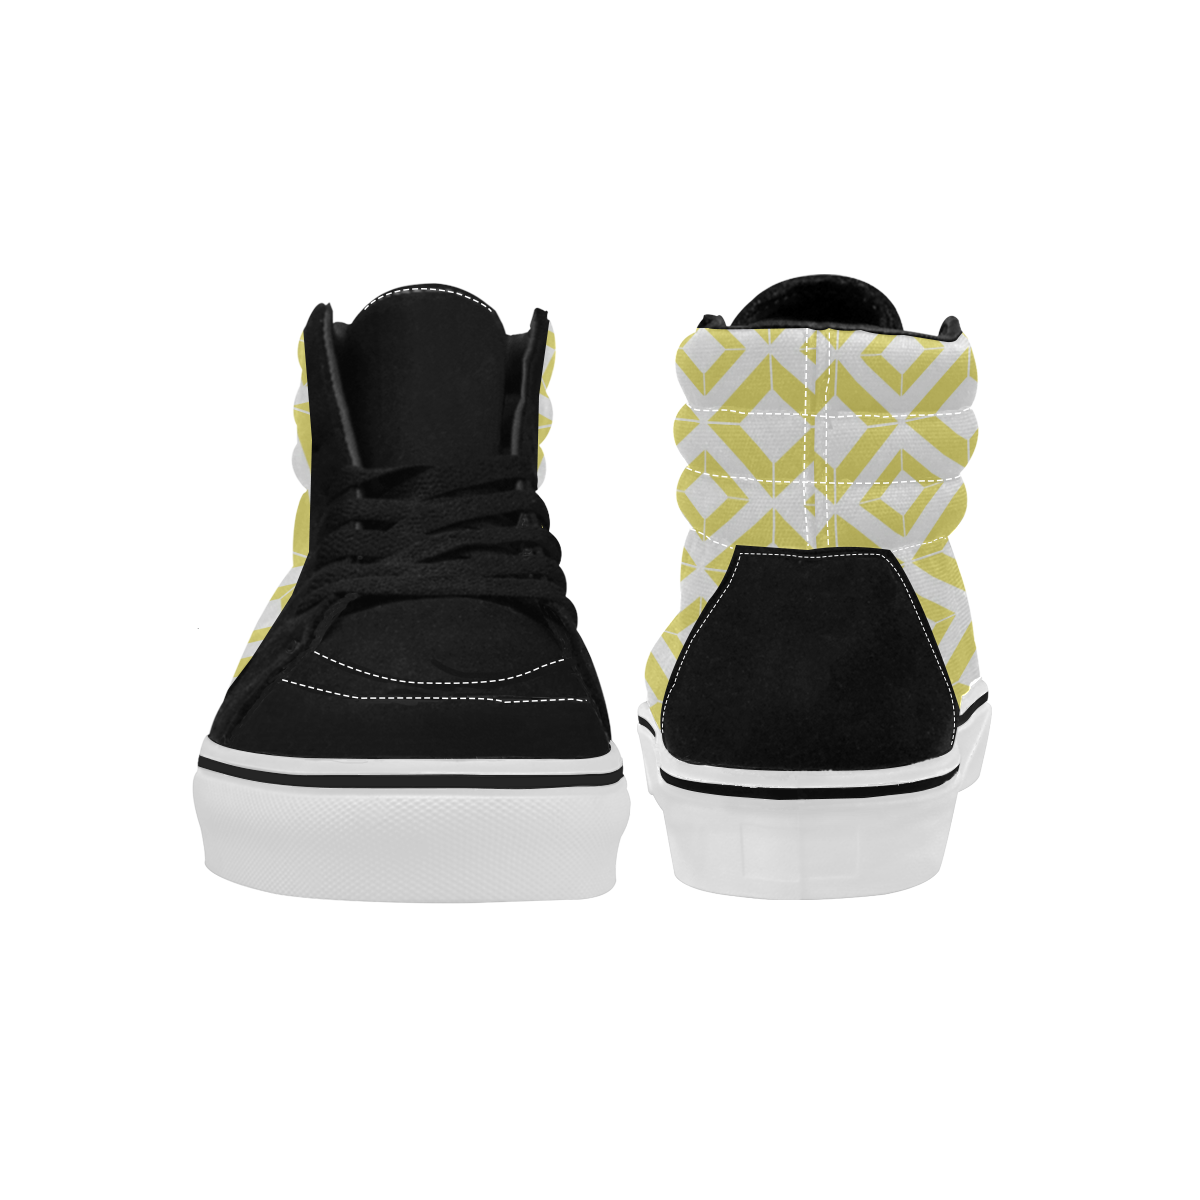 Abstract geometric pattern - gold and white. Women's High Top Skateboarding Shoes/Large (Model E001-1)